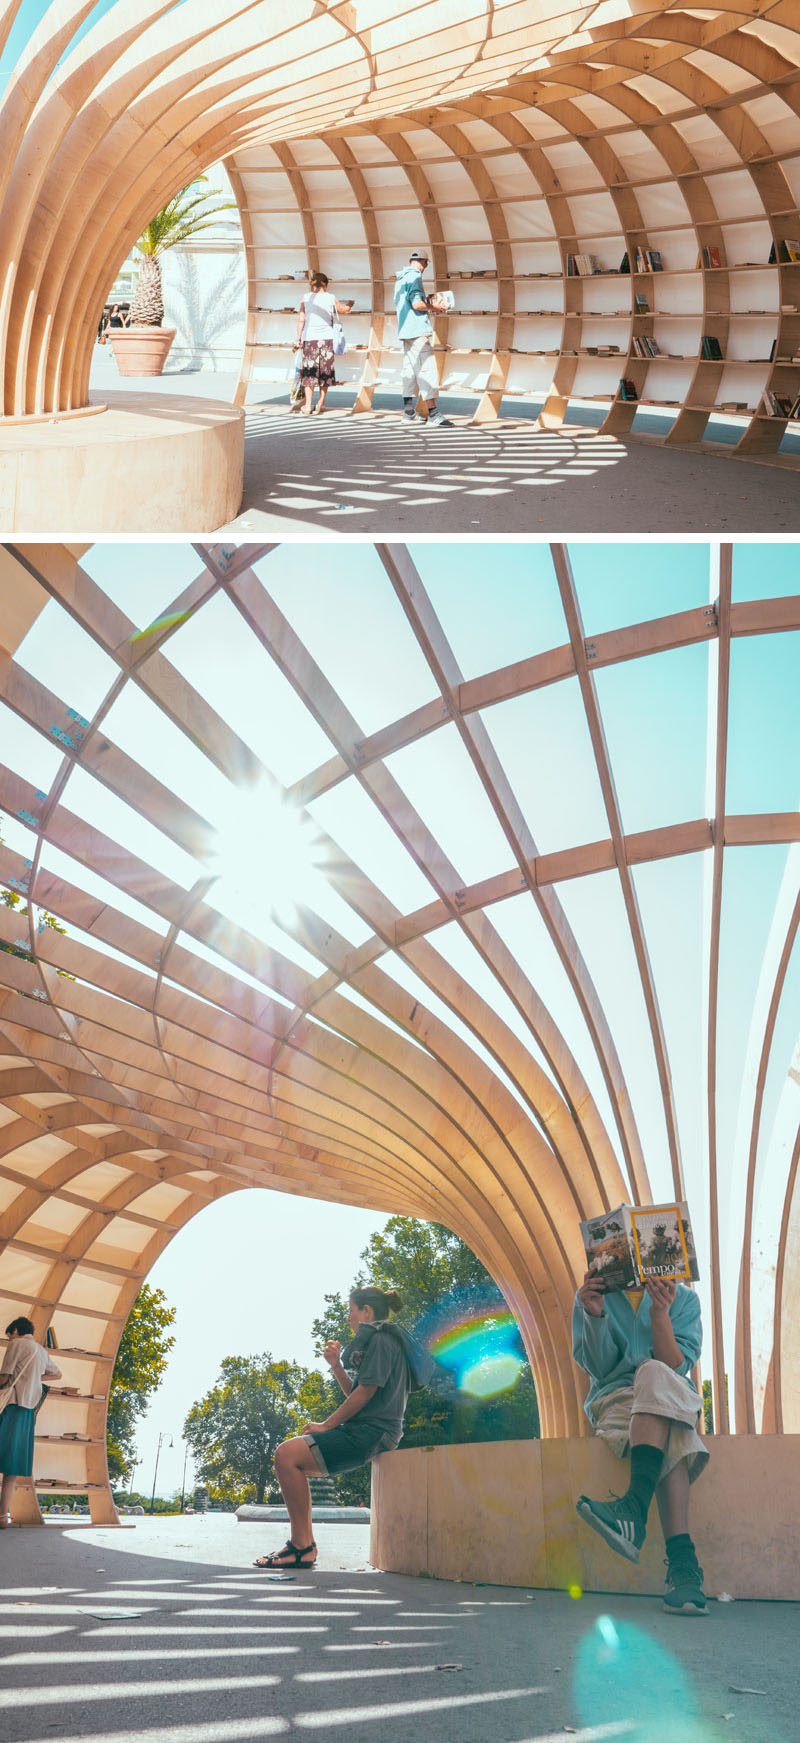 modern-curved-wood-street-library-design-architecture-011017-442-02-800x1743